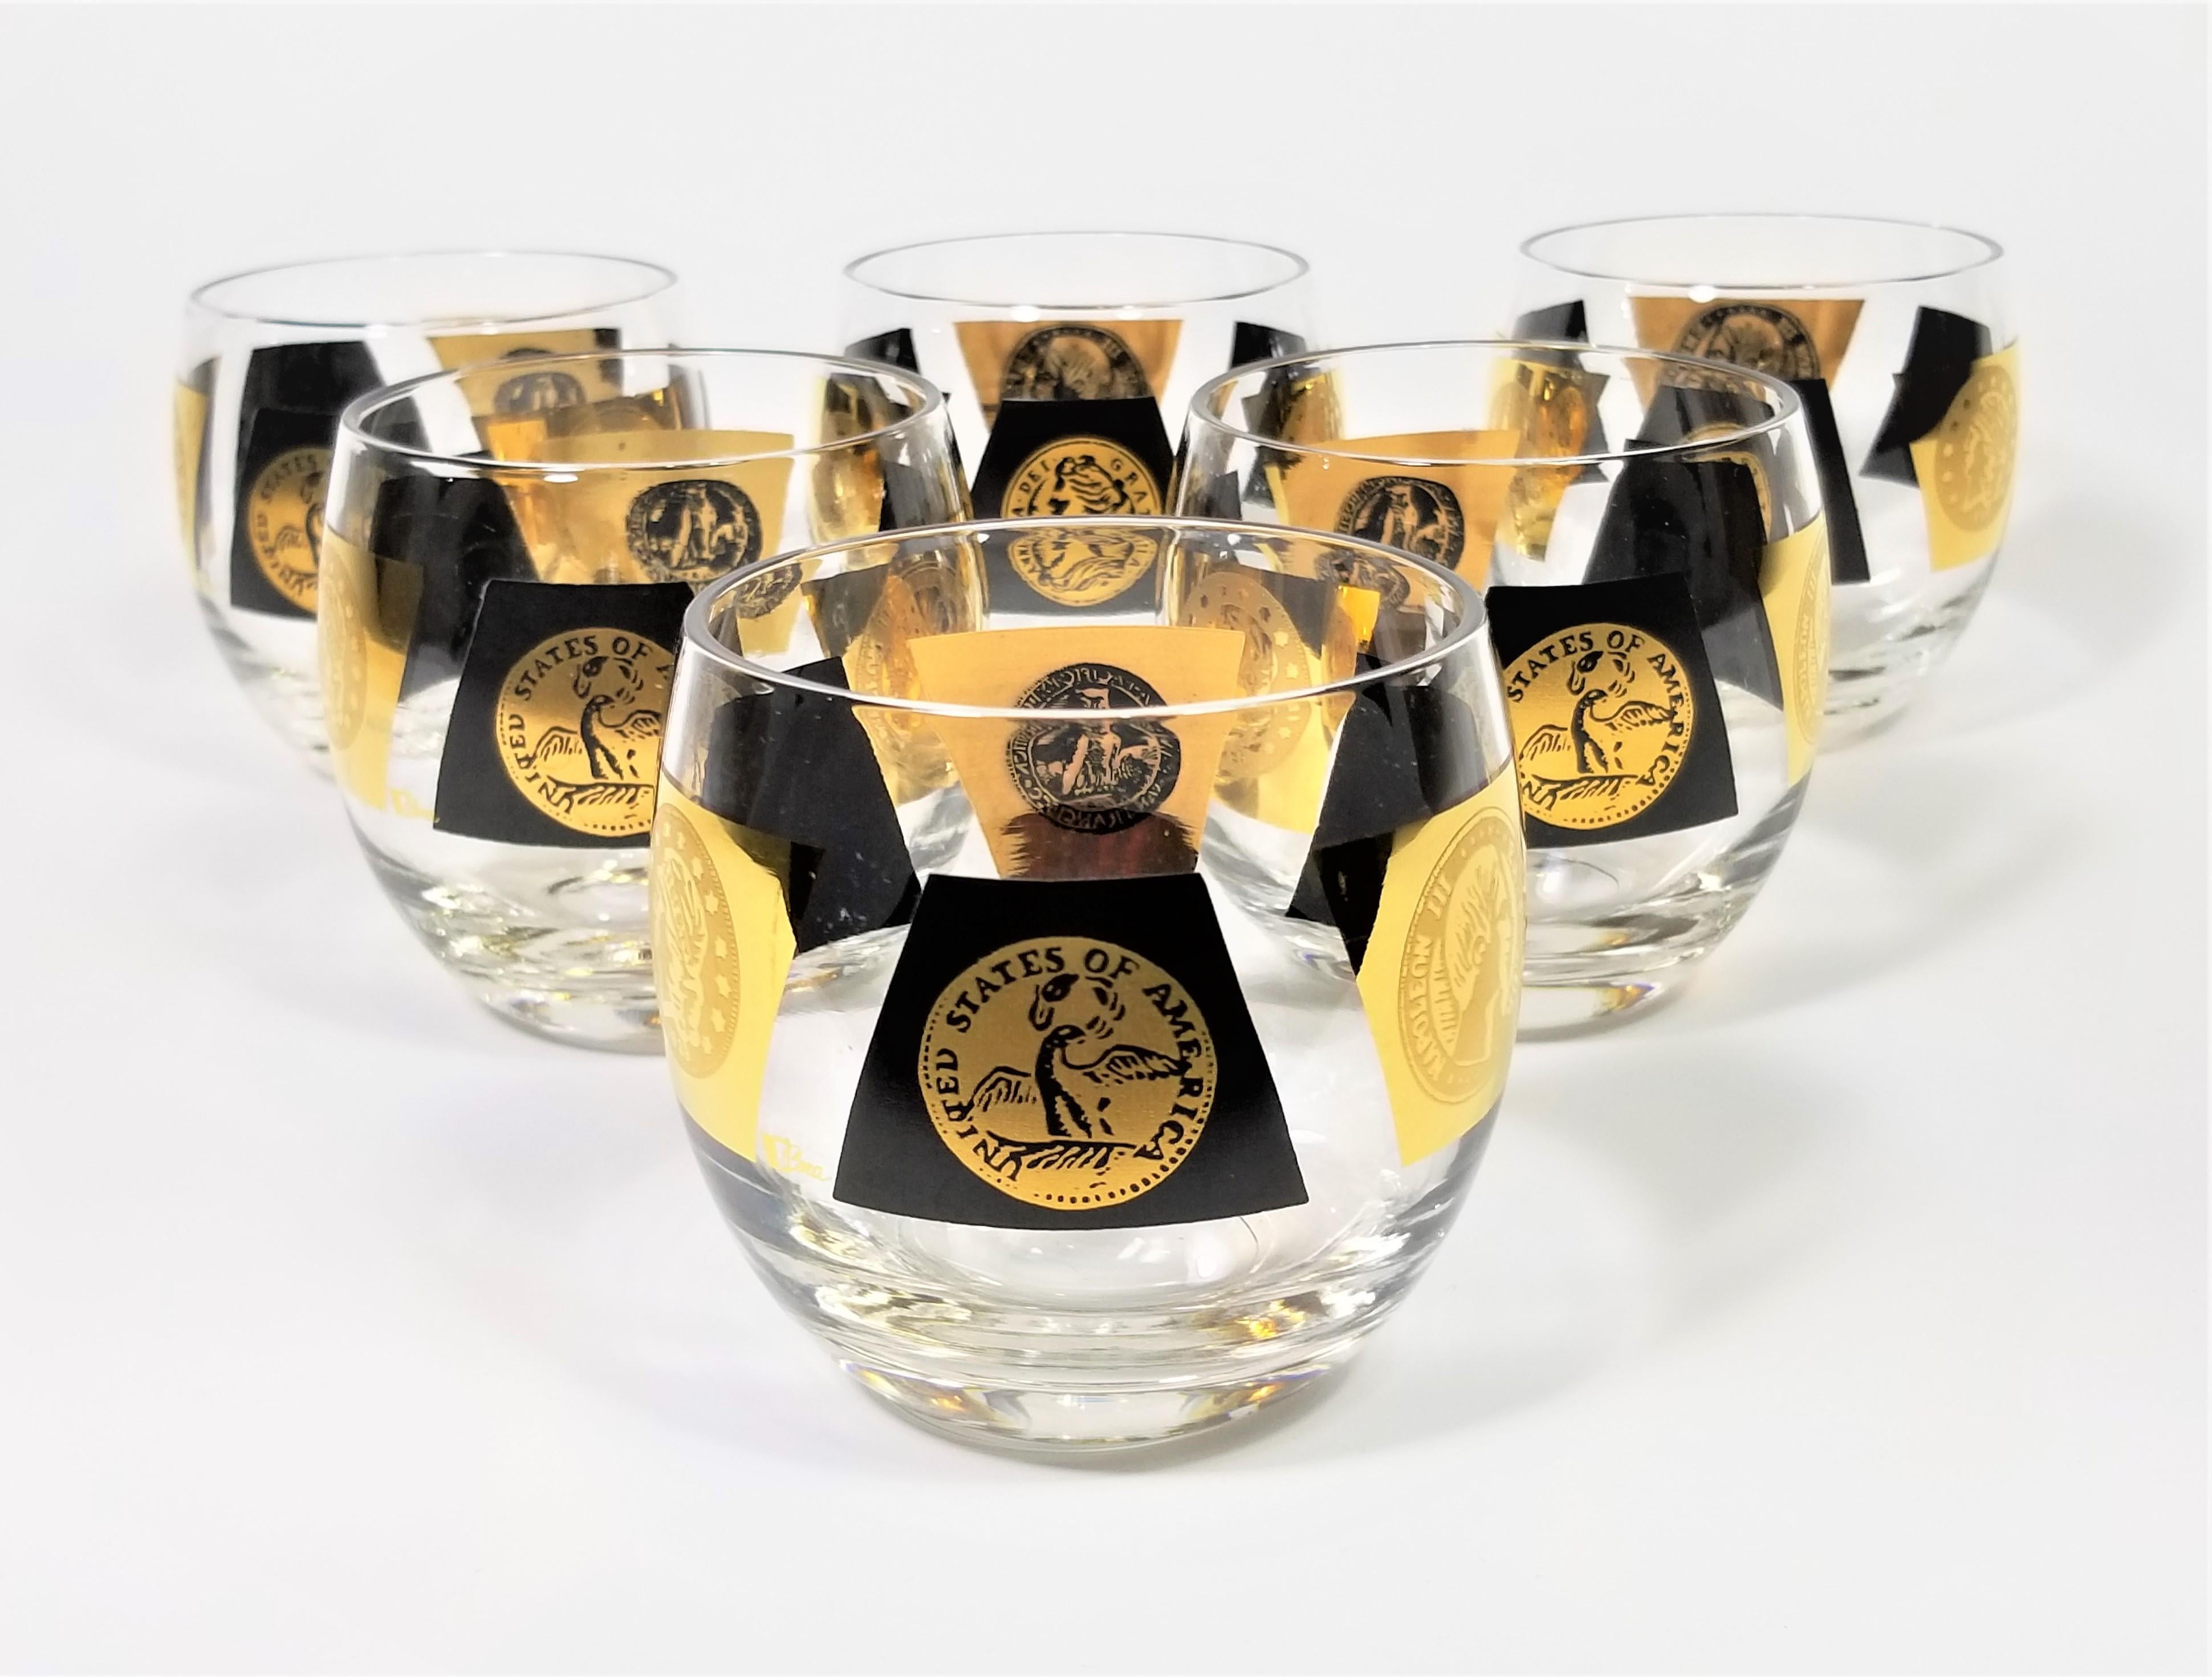 Midcentury 1960s Cera 22-karat gold and black glassware barware. Often referred to as roly poly glasses due to their round modern shape. All glasses are signed Cera.